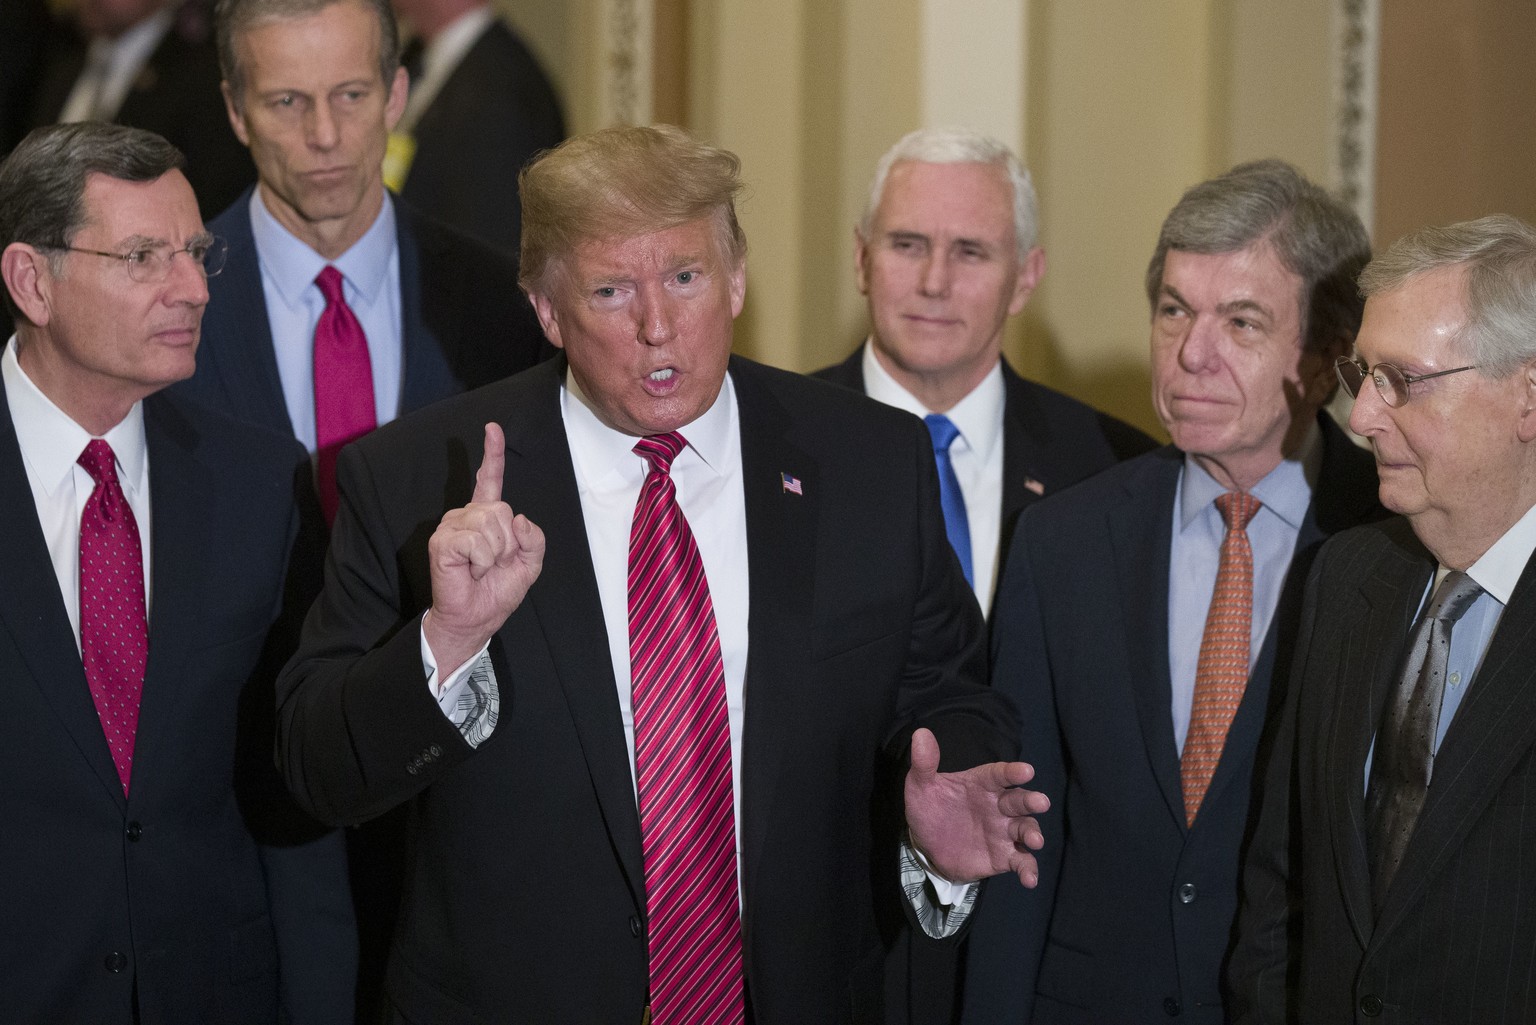 Sen. John Barrasso, R-Wyo., left, and Sen. John Thune, R-S.D., stand with President Donald Trump, Vice President Mike Pence, Sen. Roy Blunt, R-Mo., and Senate Majority Leader Mitch McConnell of Ky., a ...